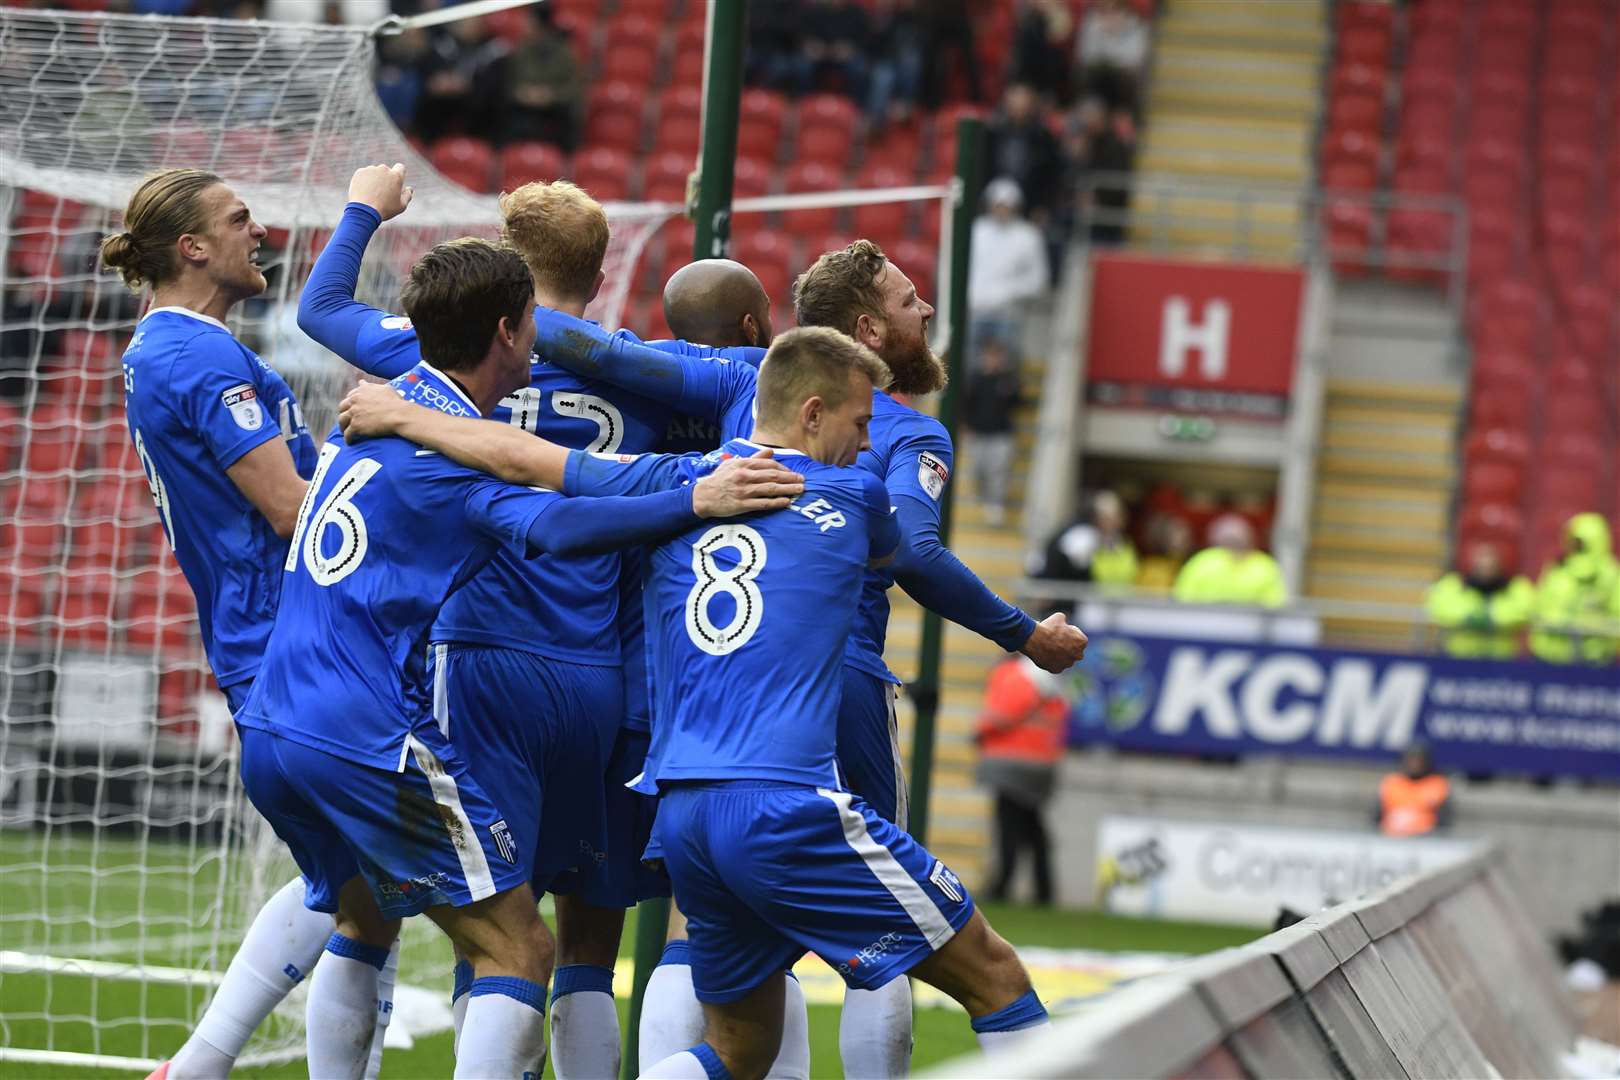 Gillingham enjoyed a 3-1 win over Rotherham United on their last visit to the New York Stadium Picture: Barry Goodwin